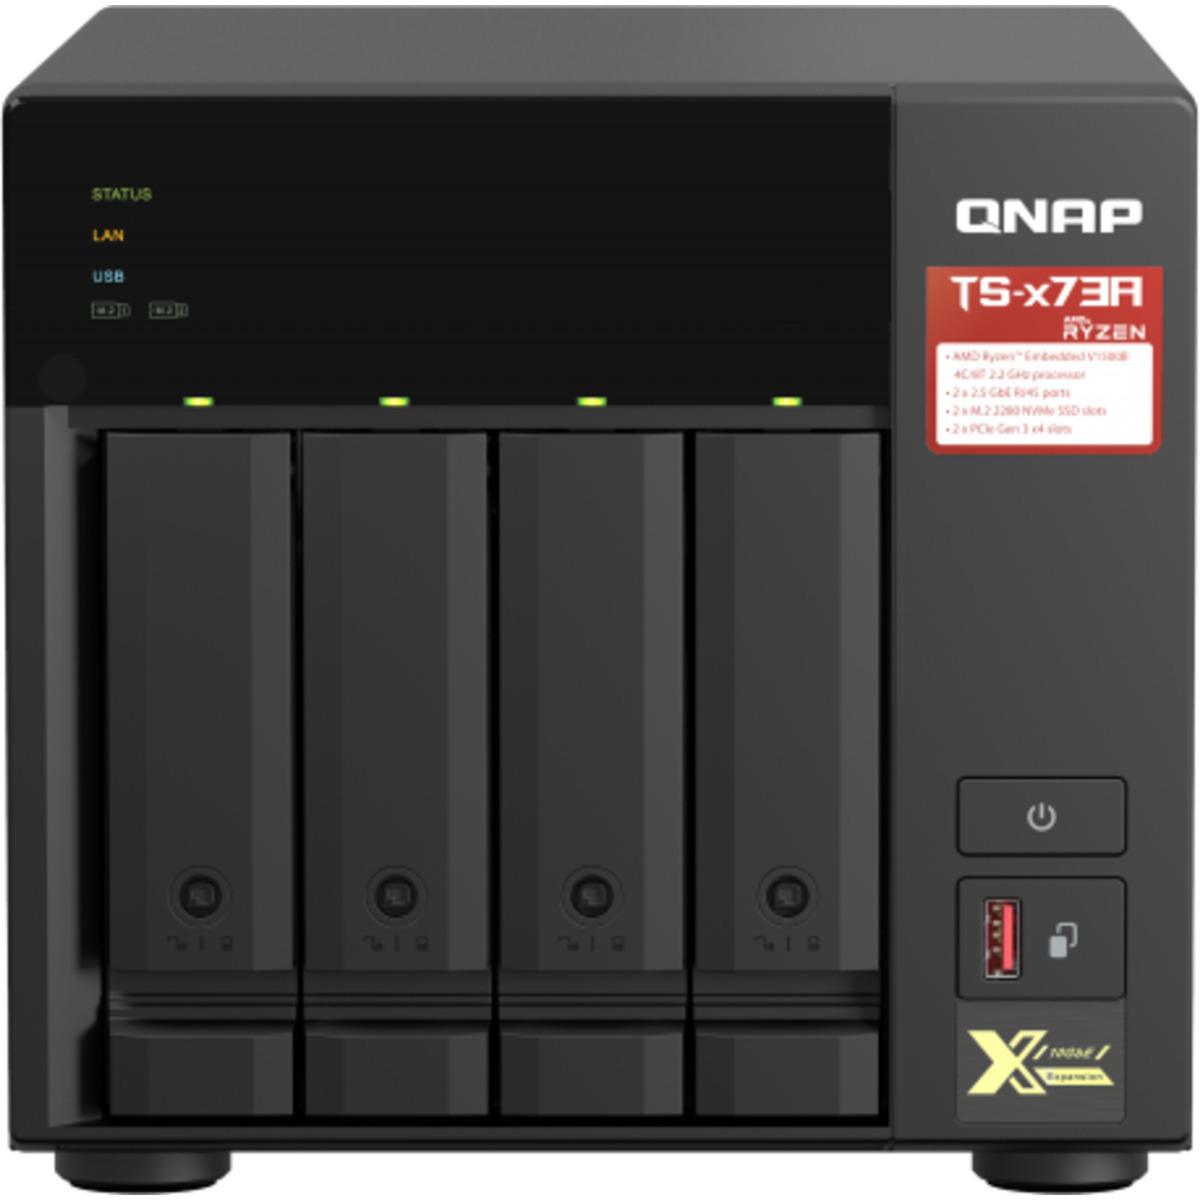 QNAP TS-473A 48tb 4-Bay Desktop Multimedia / Power User / Business NAS - Network Attached Storage Device 4x12tb Seagate EXOS X18 ST12000NM000J 3.5 7200rpm SATA 6Gb/s HDD ENTERPRISE Class Drives Installed - Burn-In Tested TS-473A